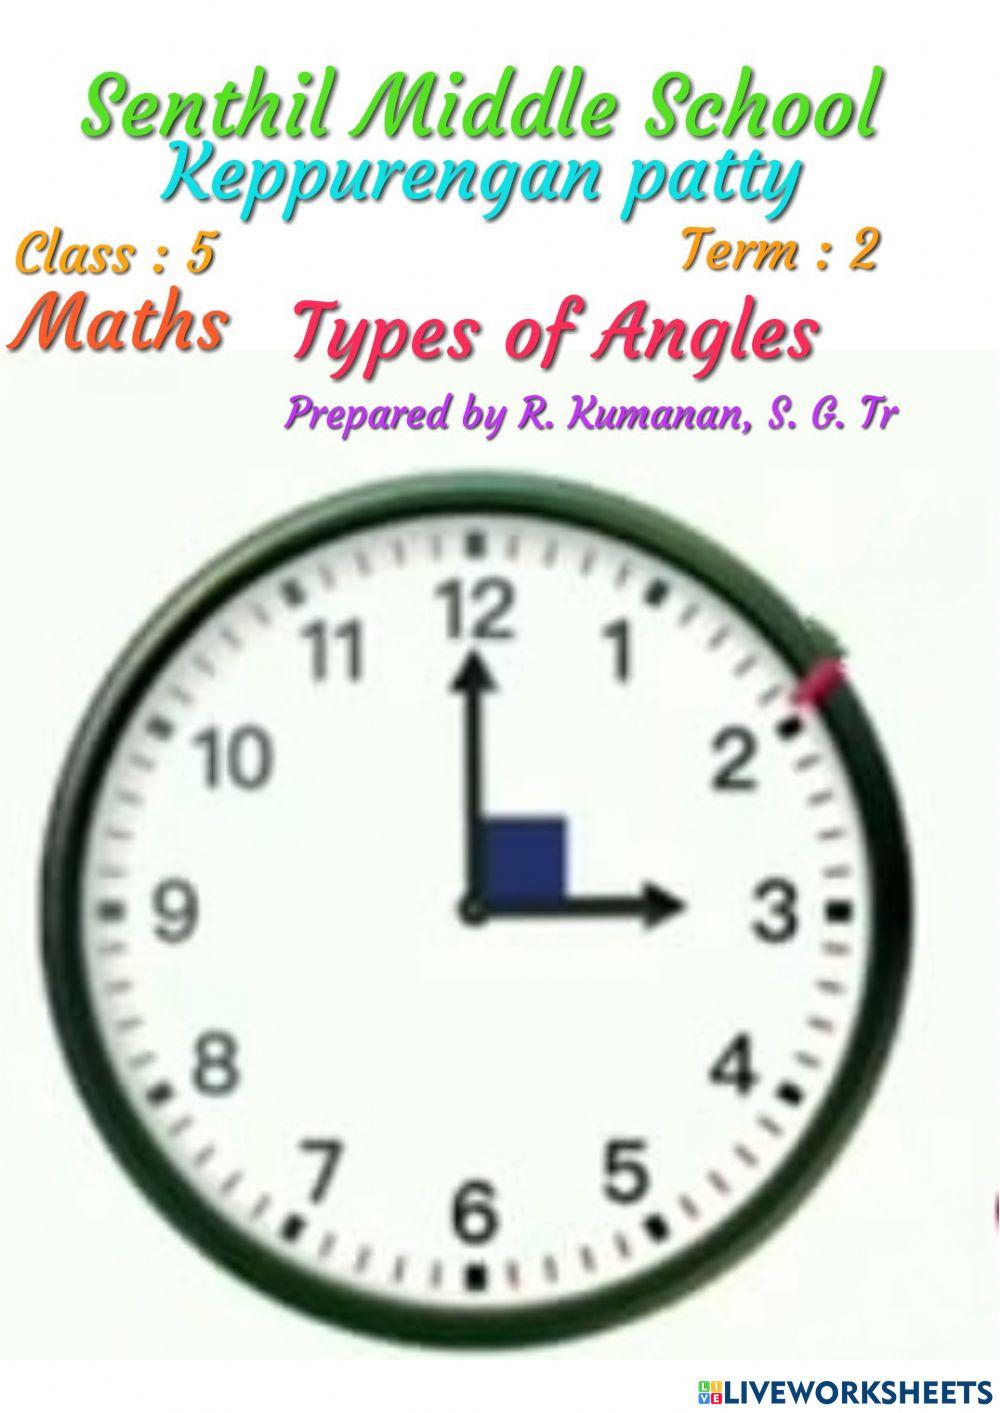 2 nd TERM- 5th STD- MATHS- UNIT:3 PATTERNS- TYPES OF ANGLES- PREPARED BY R.KUMANAN,SENTHIL MIDDLE SCHOOL, KEPPURENGAN PATTY.